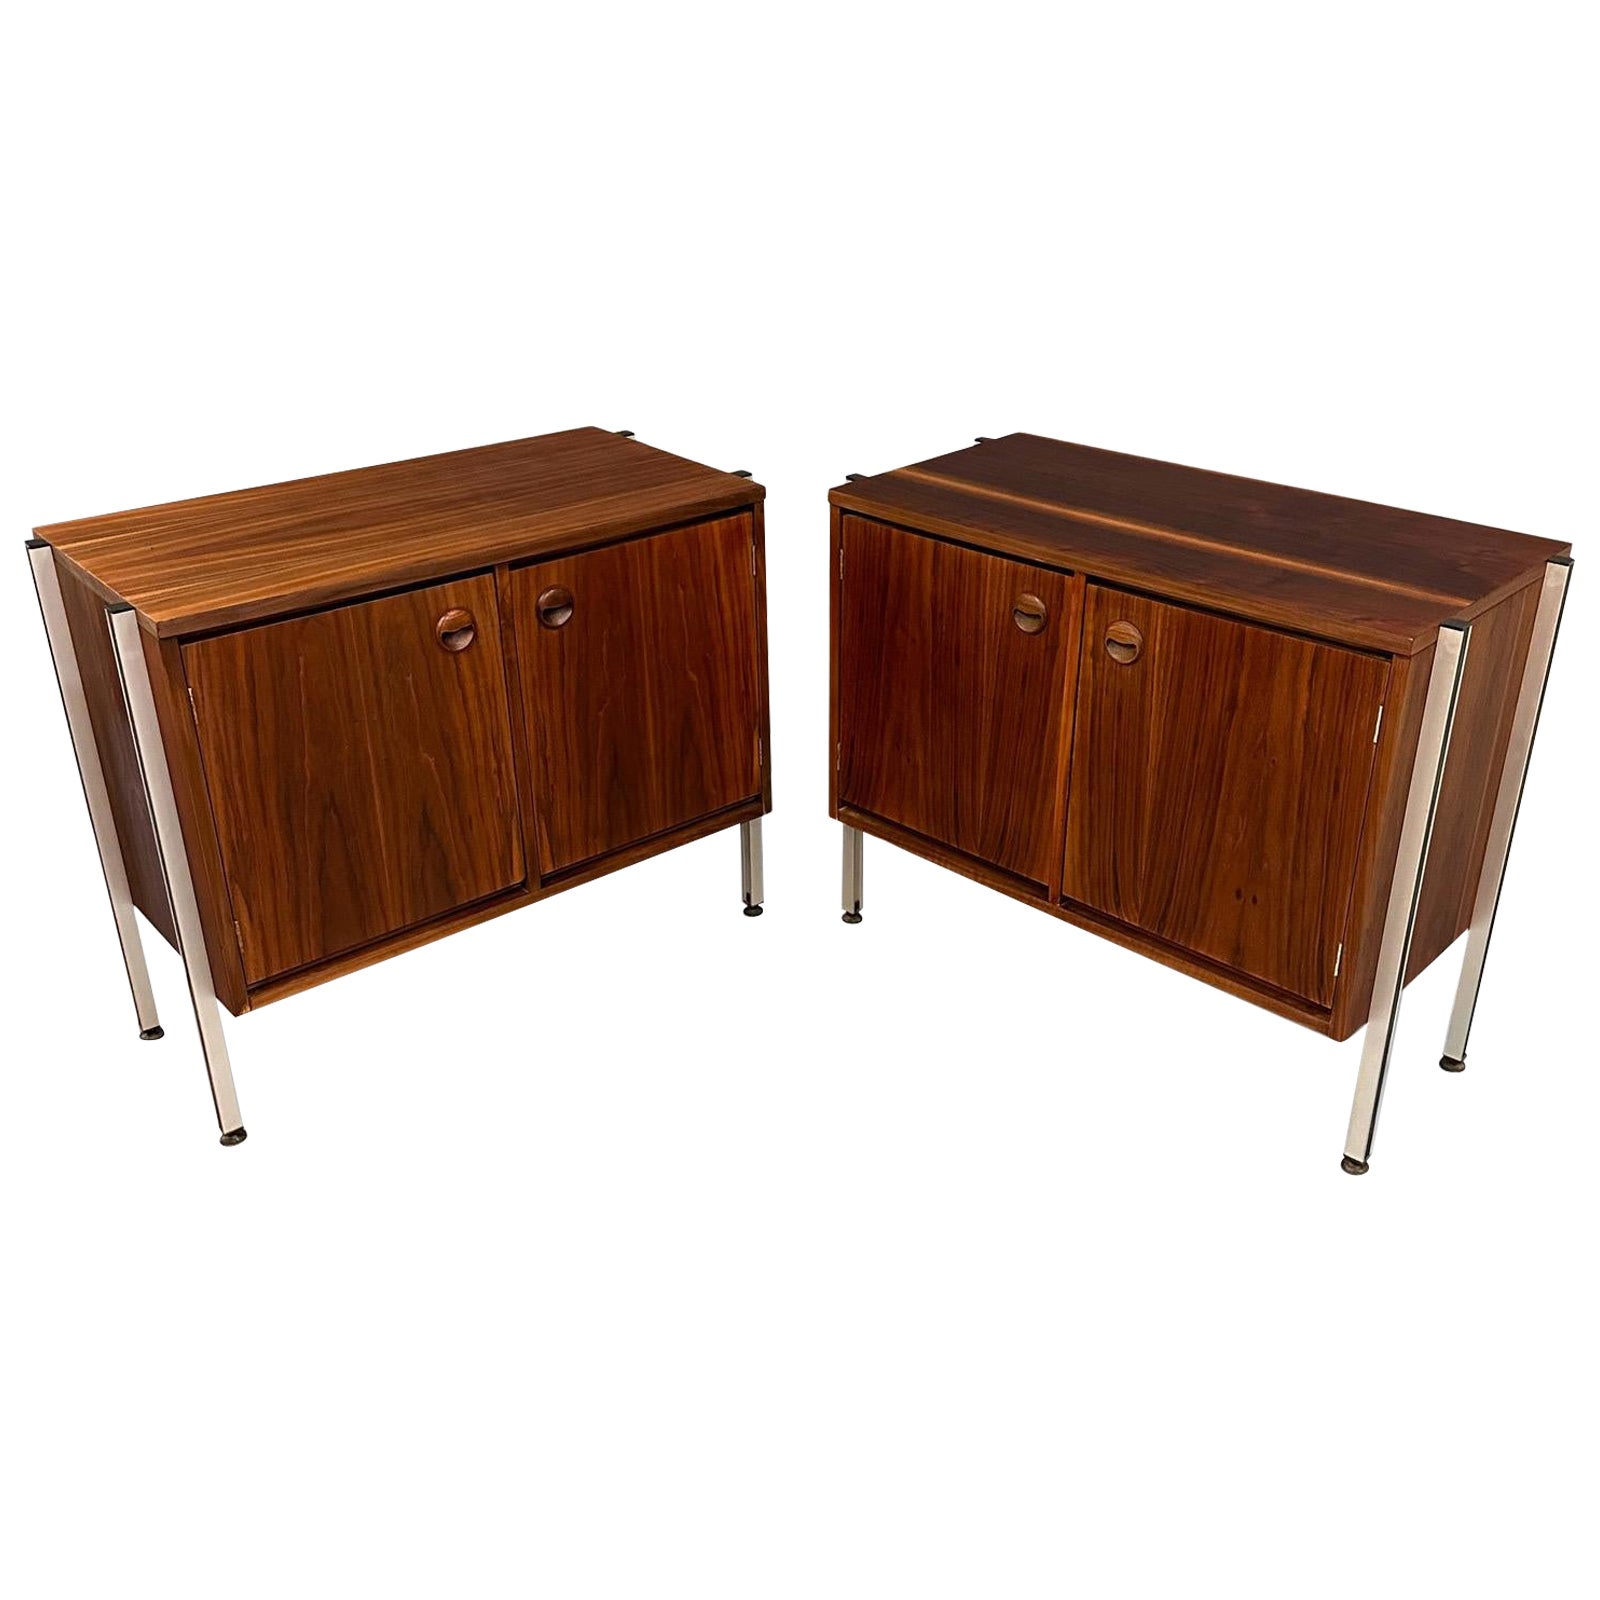 Pair of Midcentury Walnut Cabinets with Exposed Aluminum Legs Style of Wormley For Sale